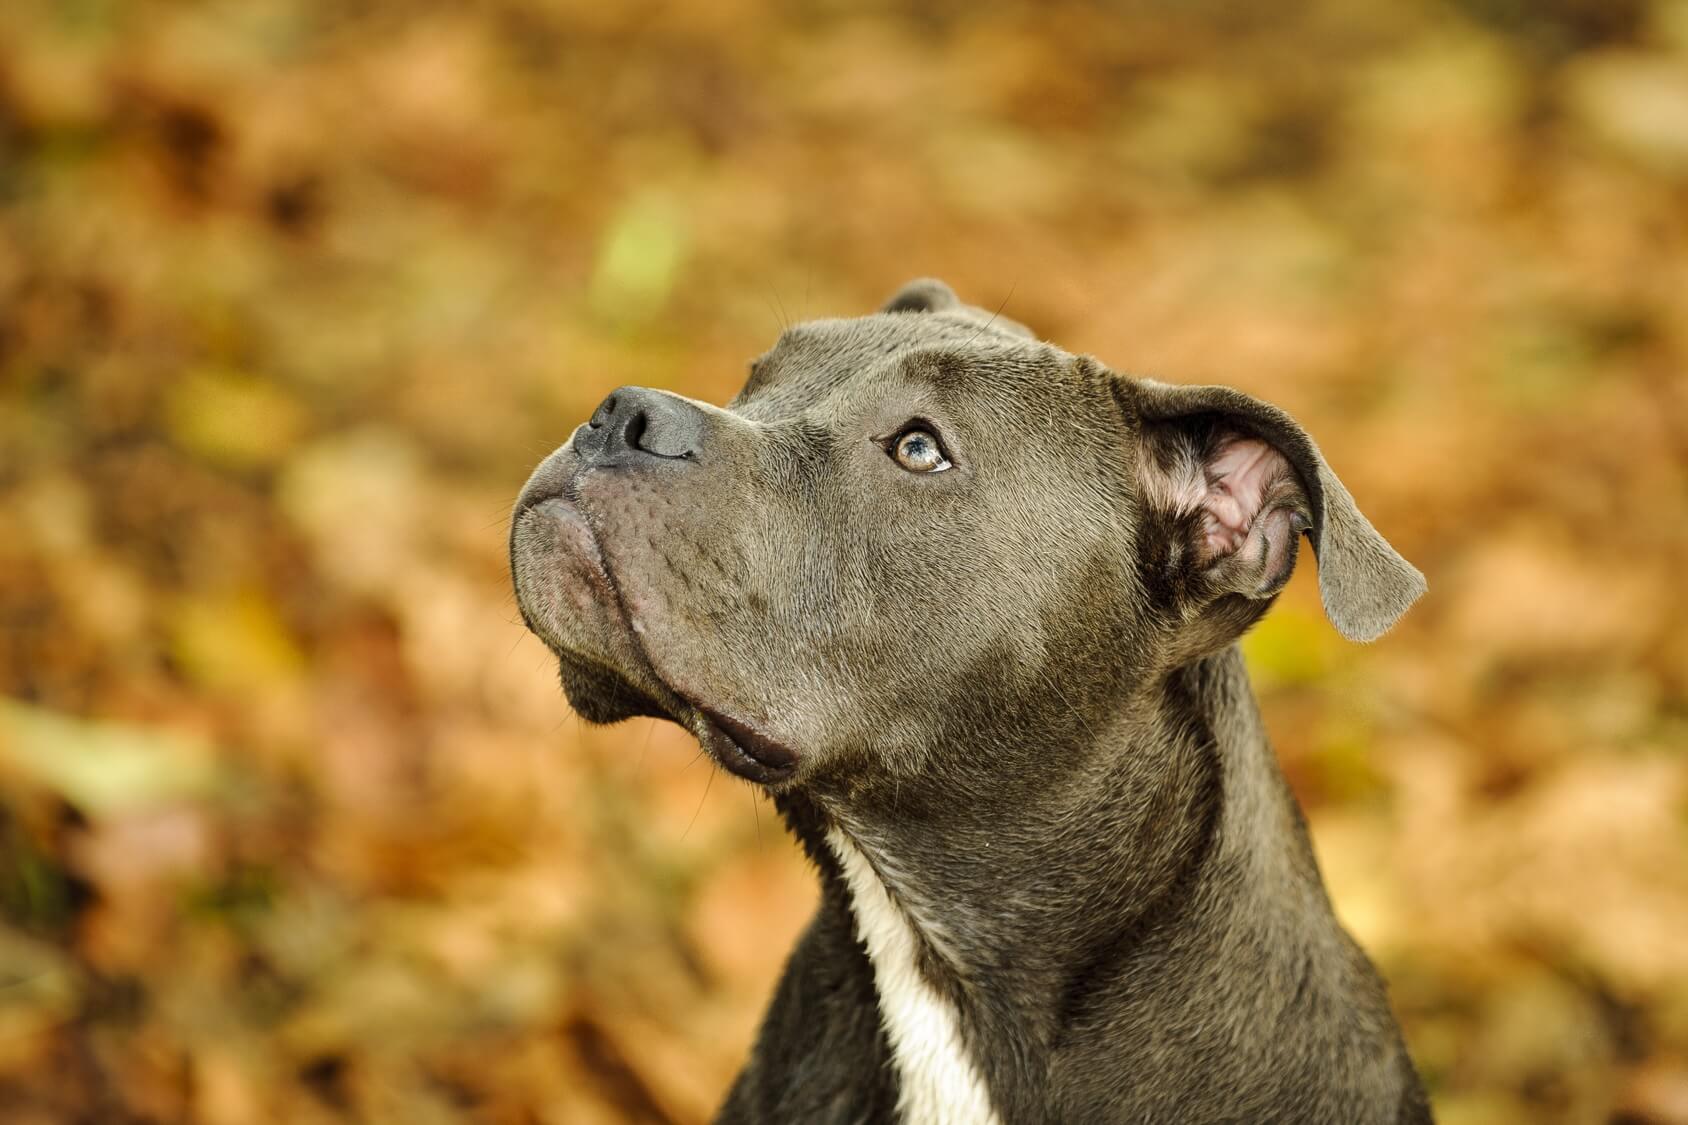 black nose pitbull puppies for sale